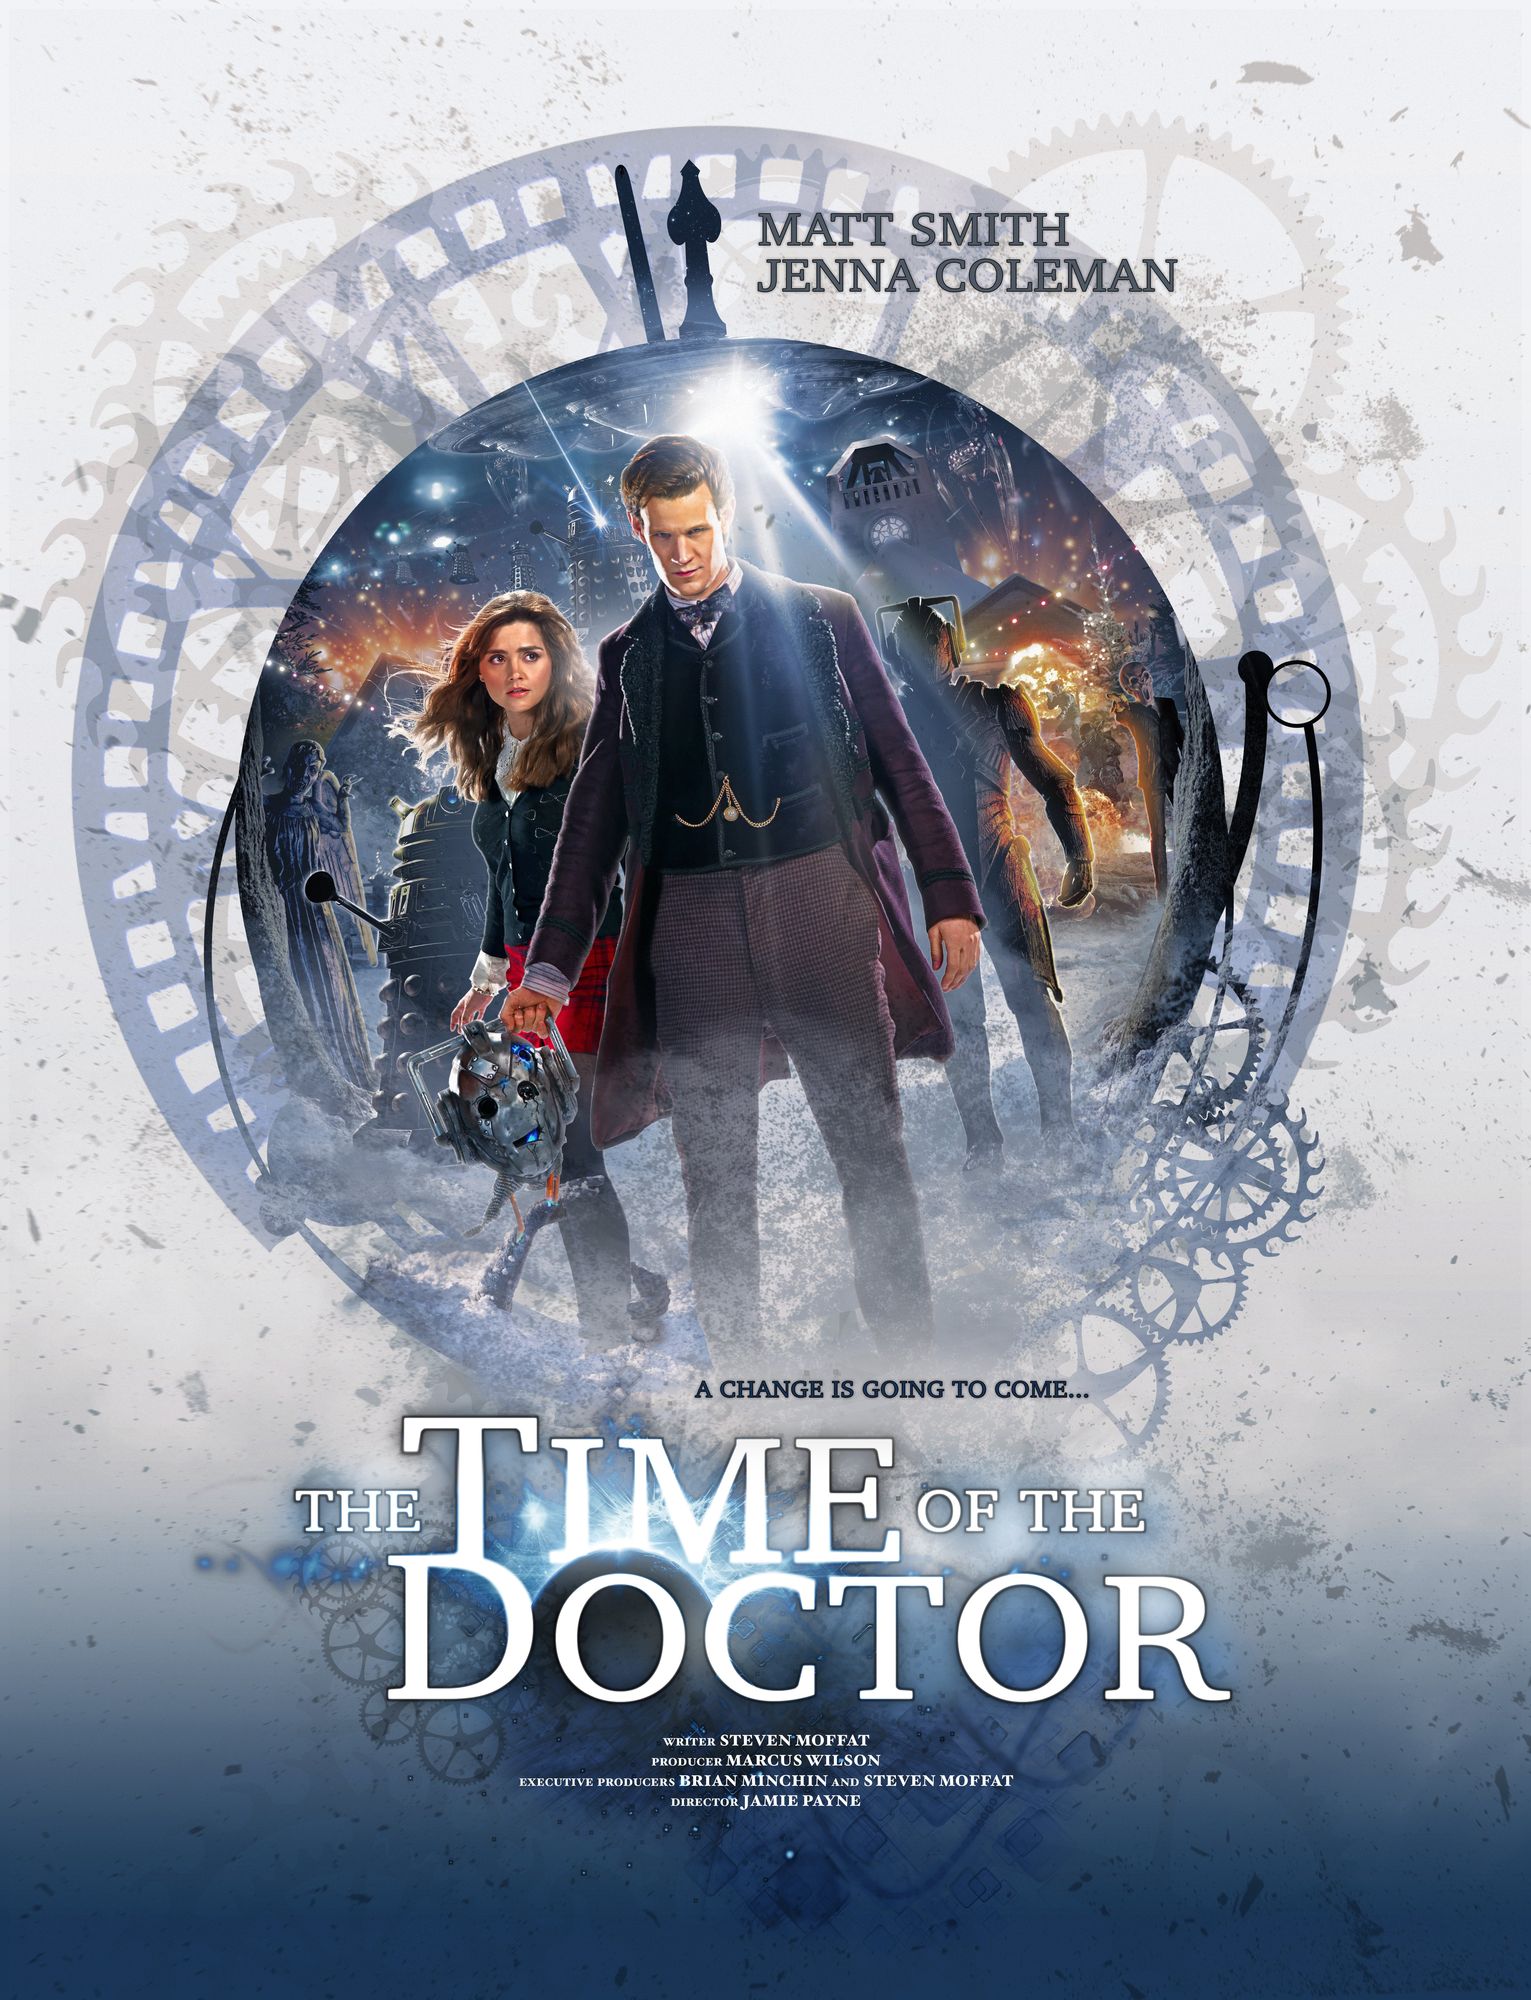 TimeOfTheDoctor-Posters-0001.jpg